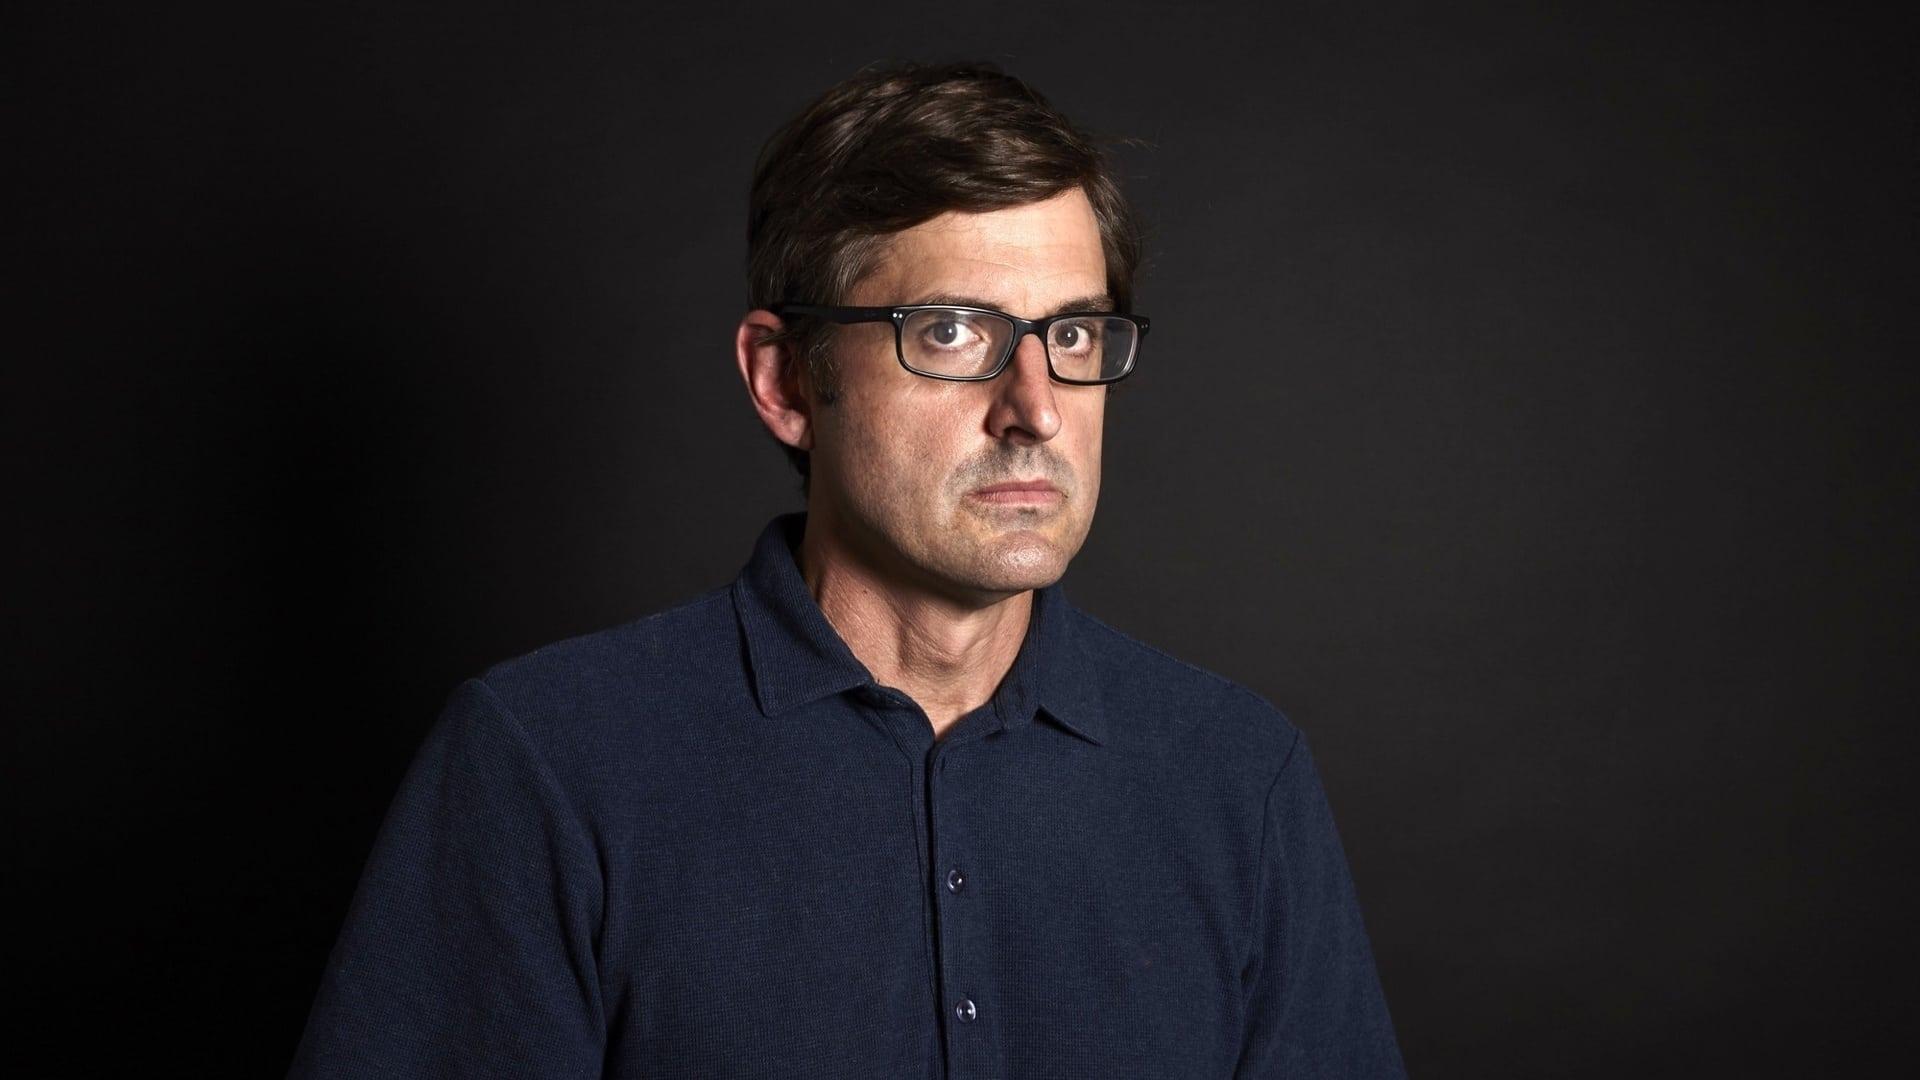 Louis Theroux: Behind Bars backdrop